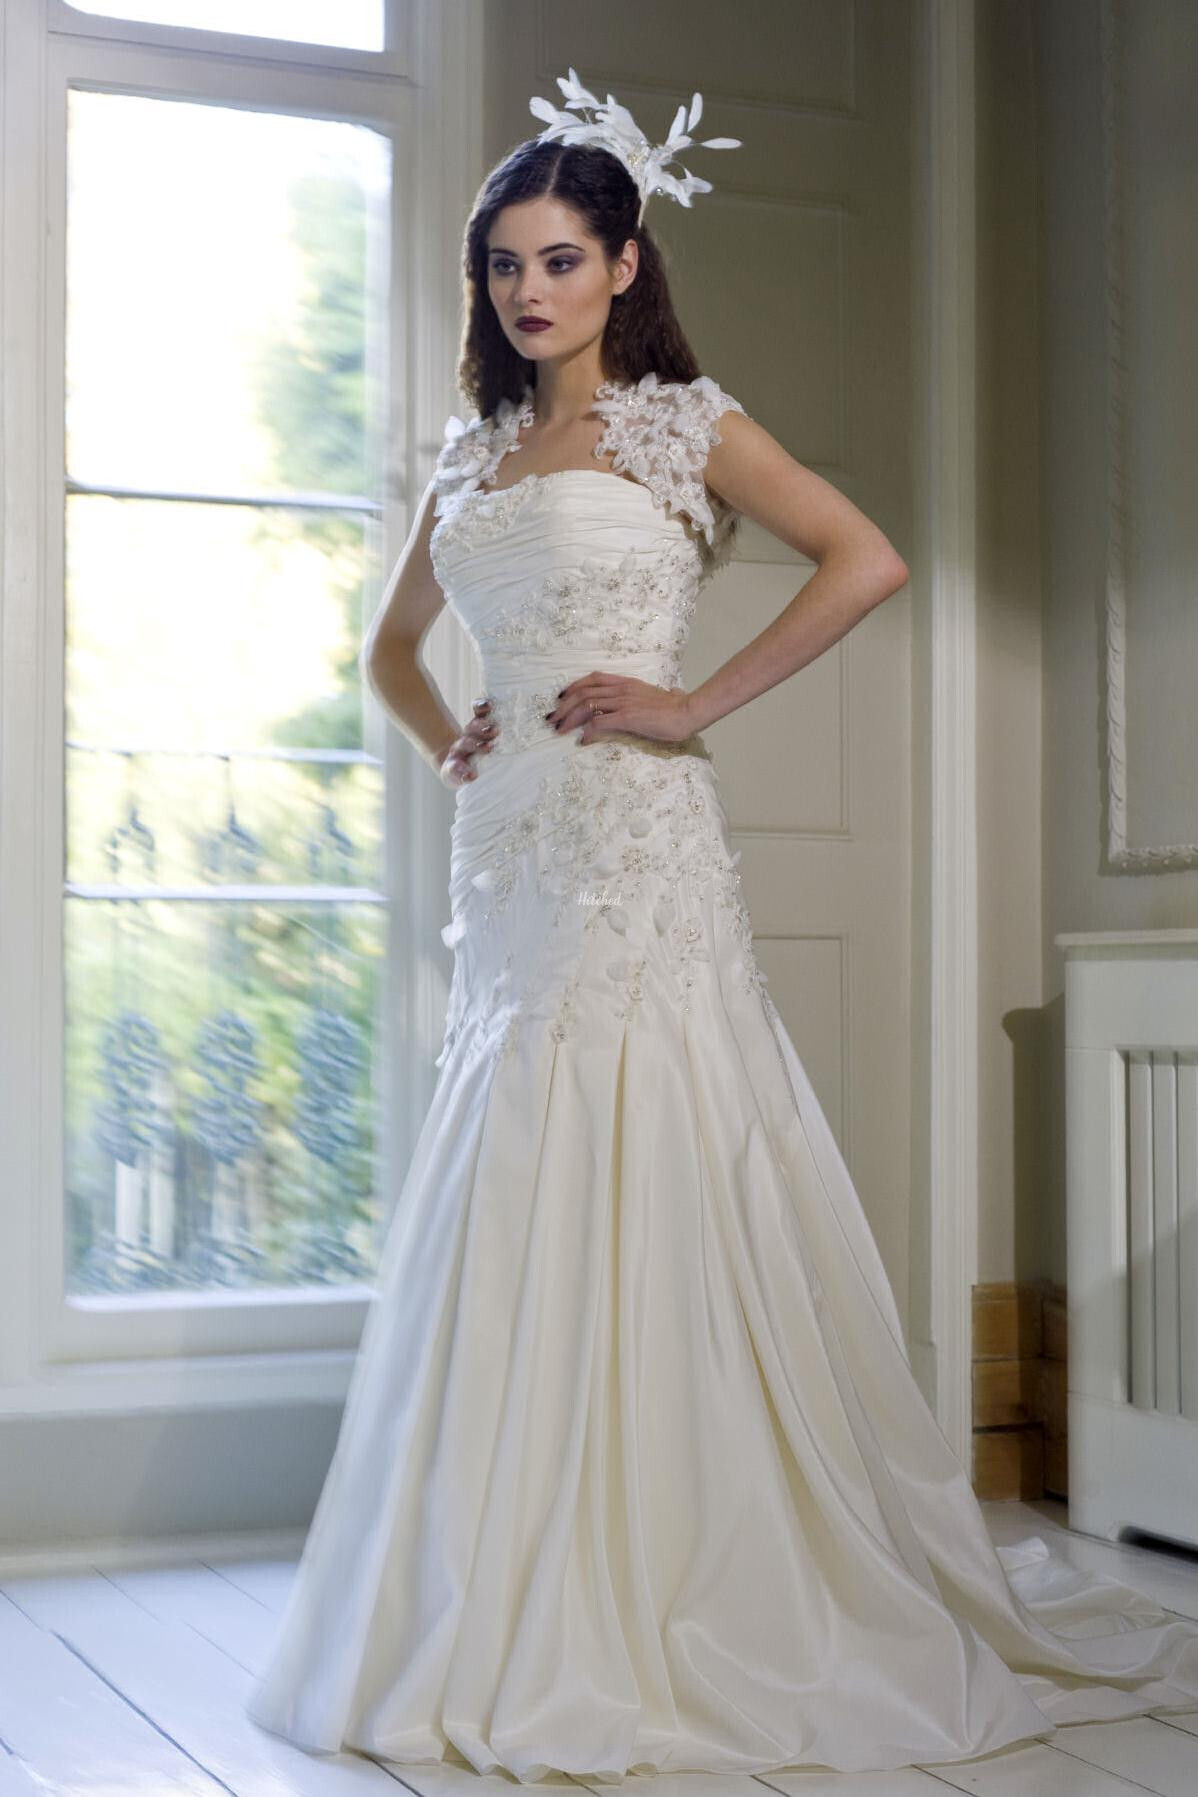 Sophie Wedding Dress from Donna Salado - hitched.co.uk